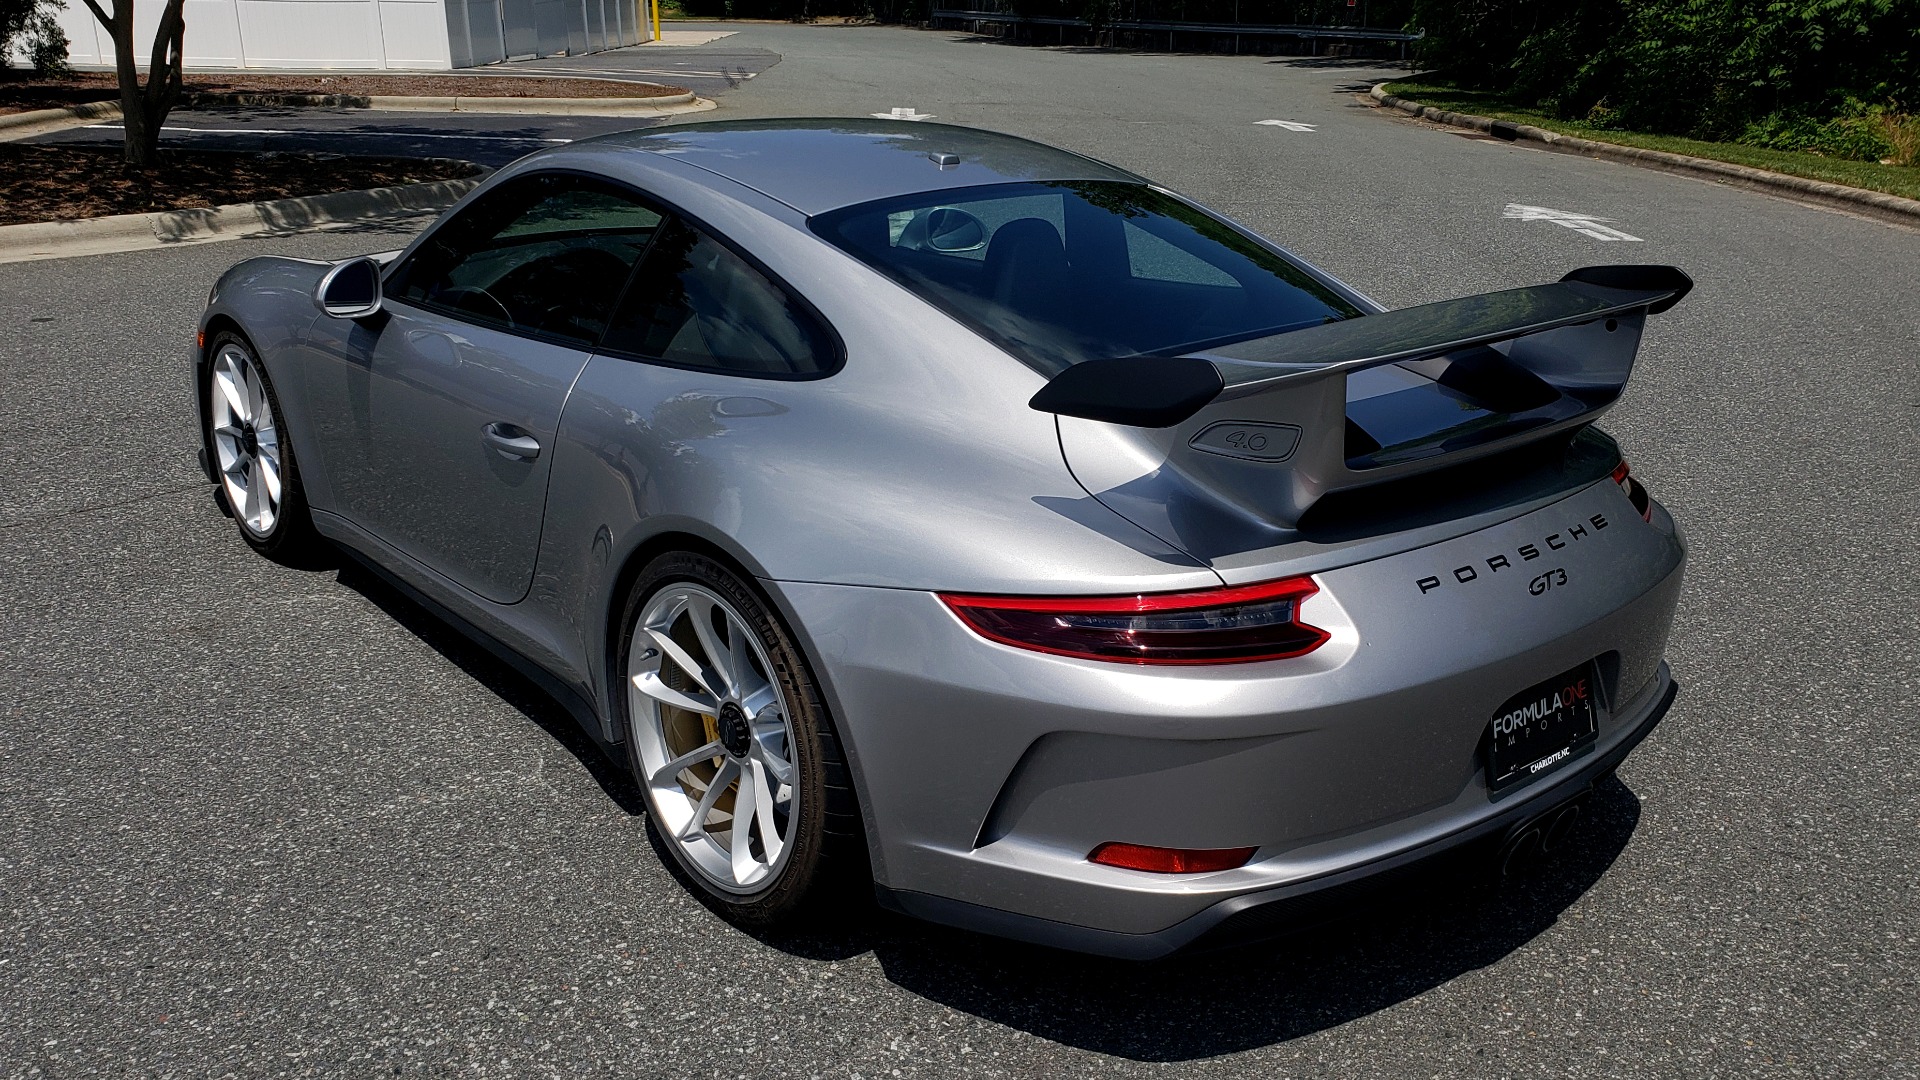 Used 2018 Porsche 911 GT3 4.0L 500HP / 6-SPD MNL / NAV / REARVIEW / PCCB for sale Sold at Formula Imports in Charlotte NC 28227 11